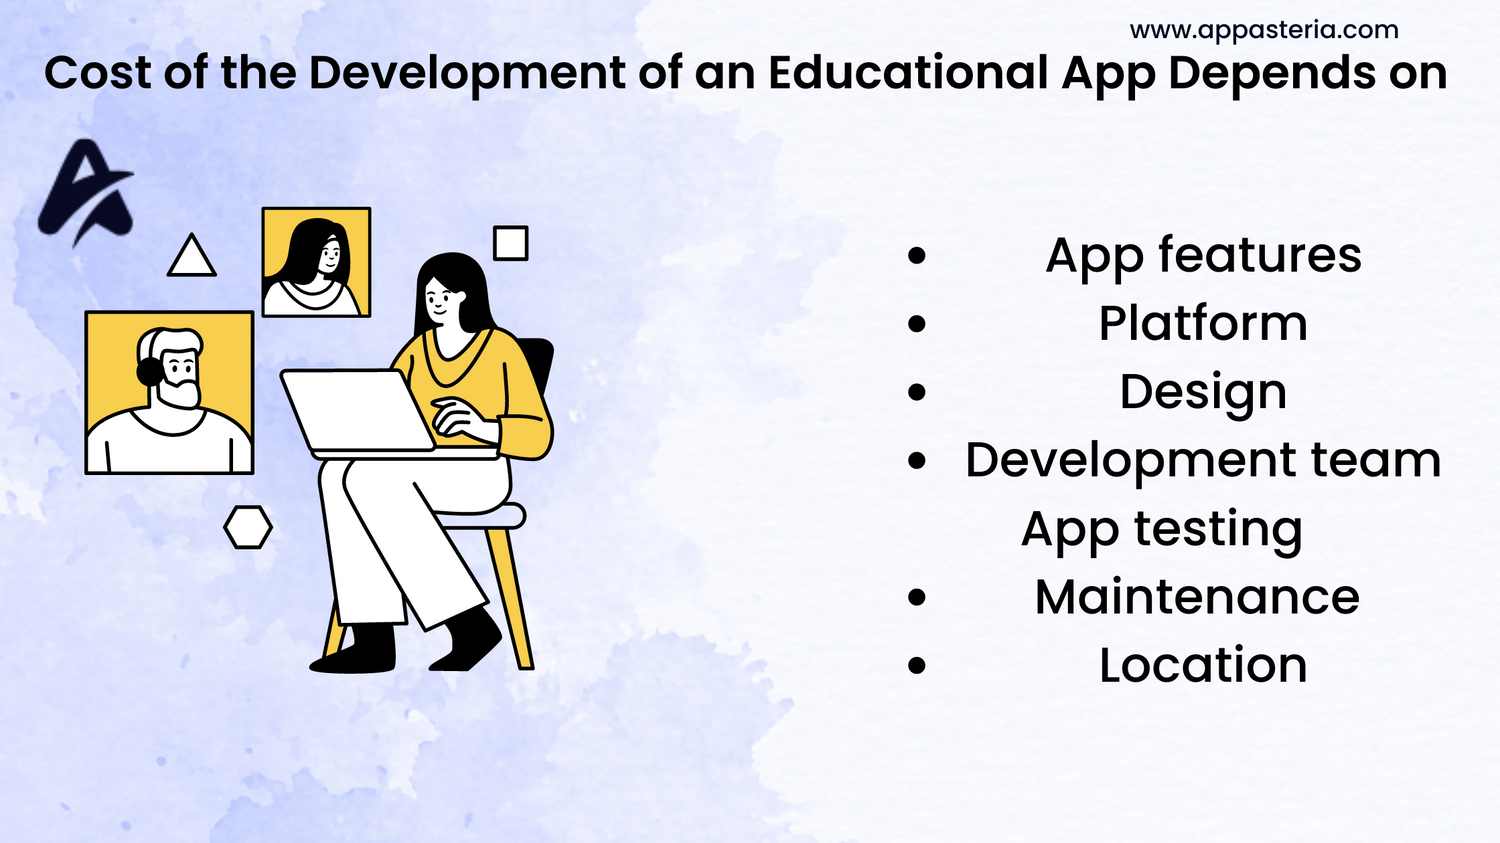 The Cost of Development an Educational App Depends on